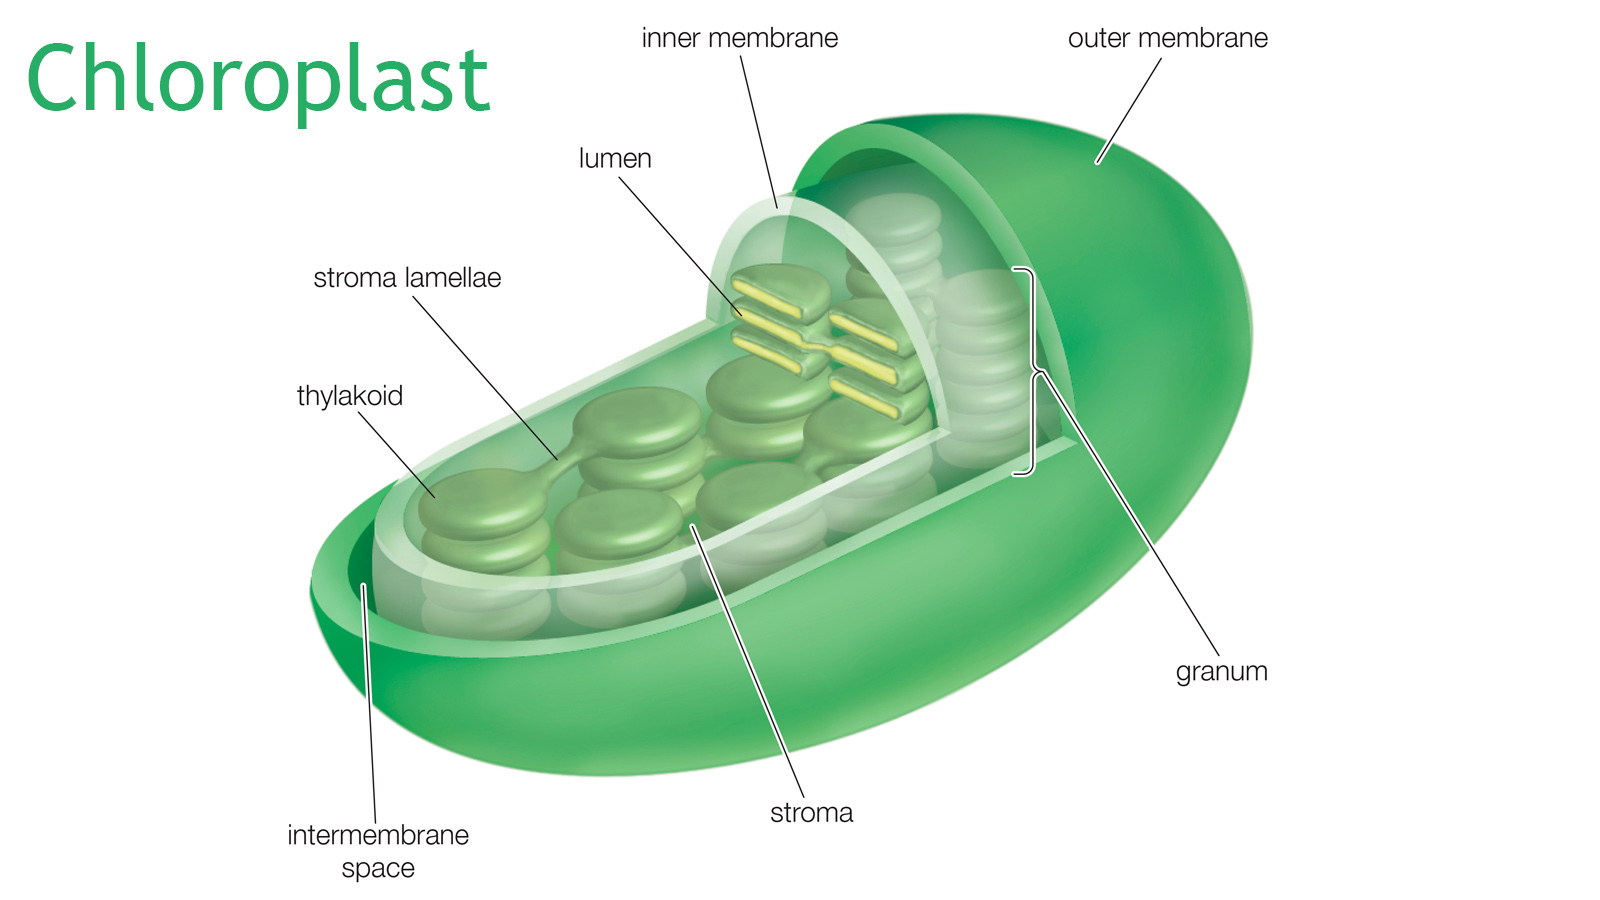 organelles convert solar energy into glucose and oxygen